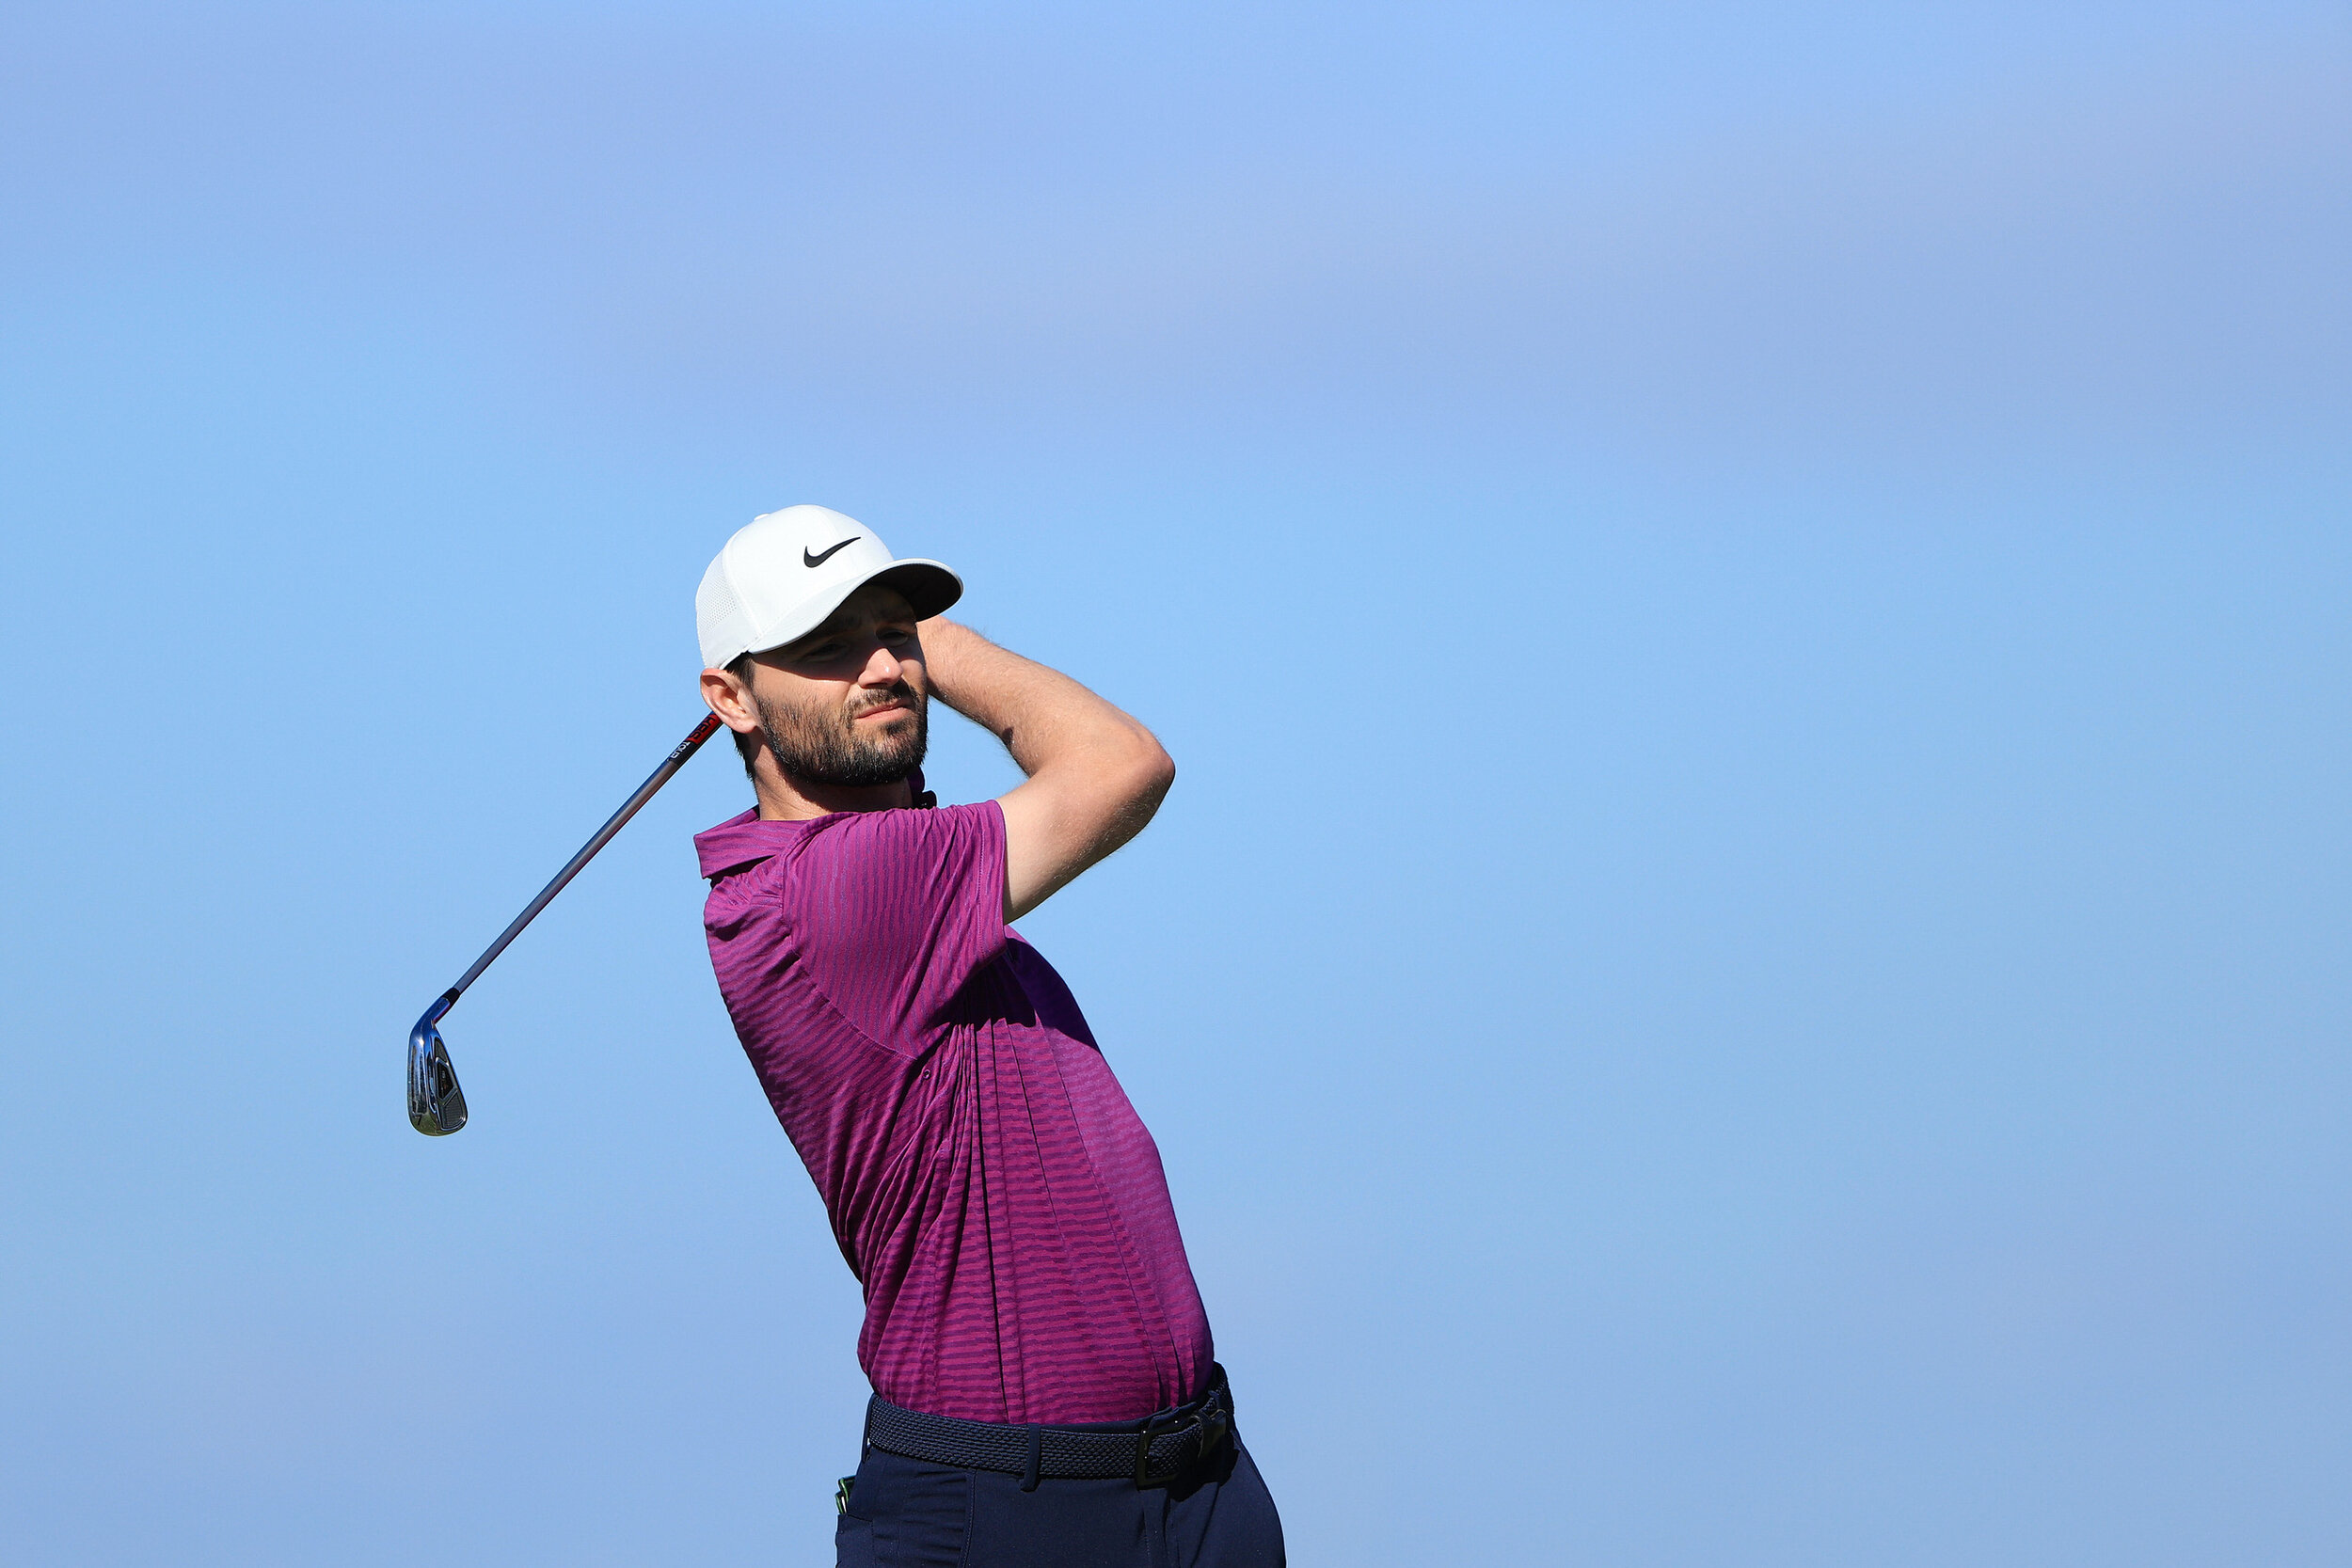  ST SIMONS ISLAND, GEORGIA - NOVEMBER 21: Kyle Stanley of the United States plays his shot from the sixth tee during the third round of The RSM Classic at the Seaside Course at Sea Island Golf Club on November 21, 2020 in St Simons Island, Georgia. (